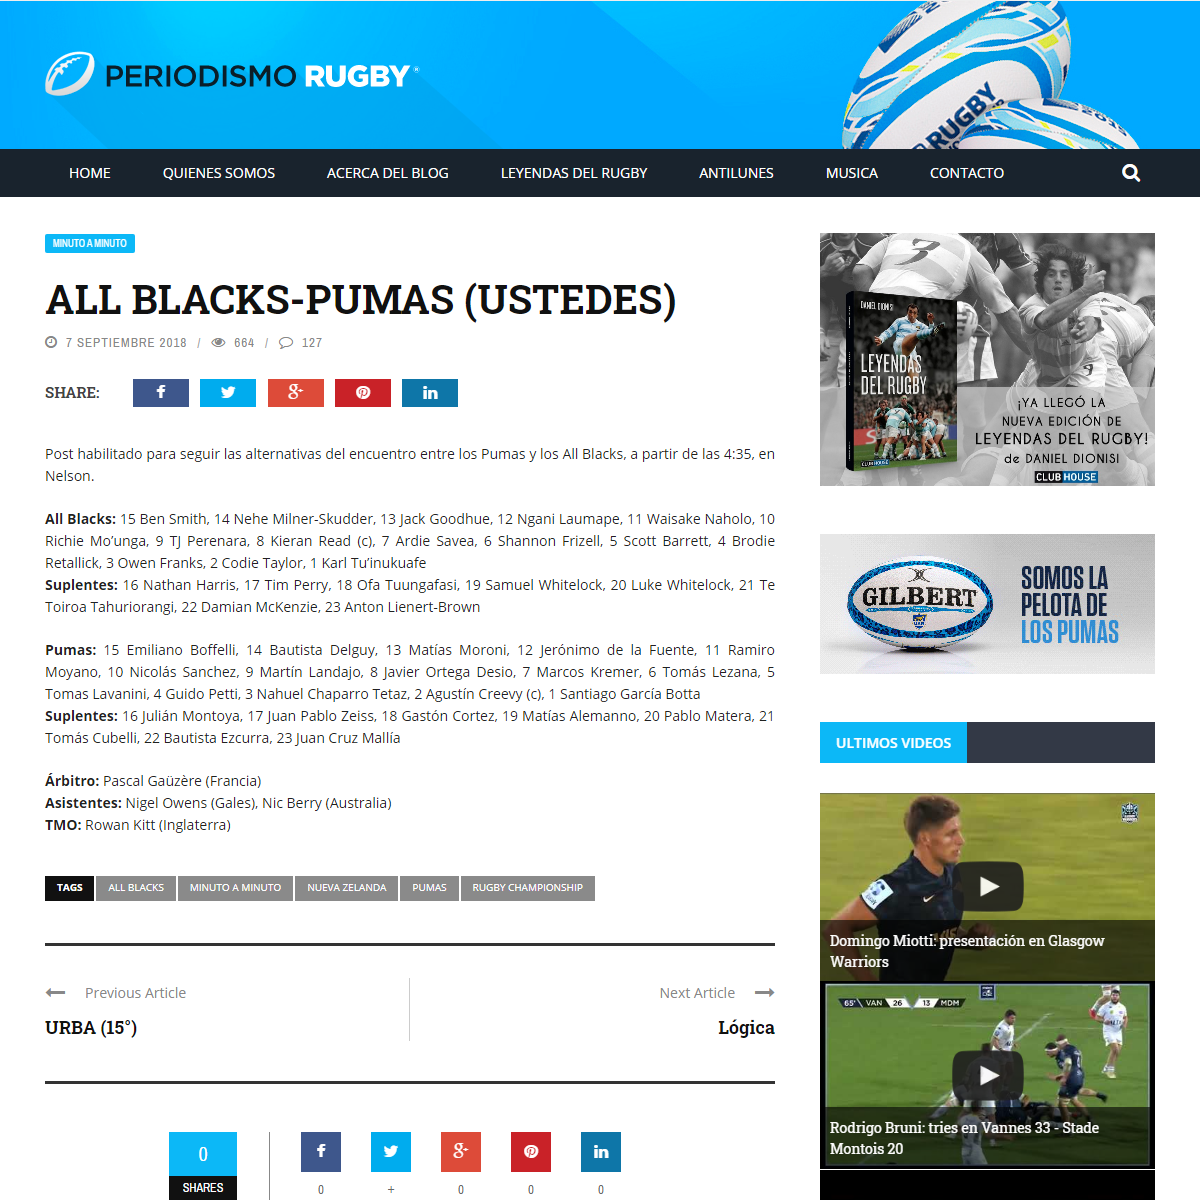 A complete backup of https://www.periodismo-rugby.com.ar/2018/09/07/all-blacks-pumas-ustedes-4/